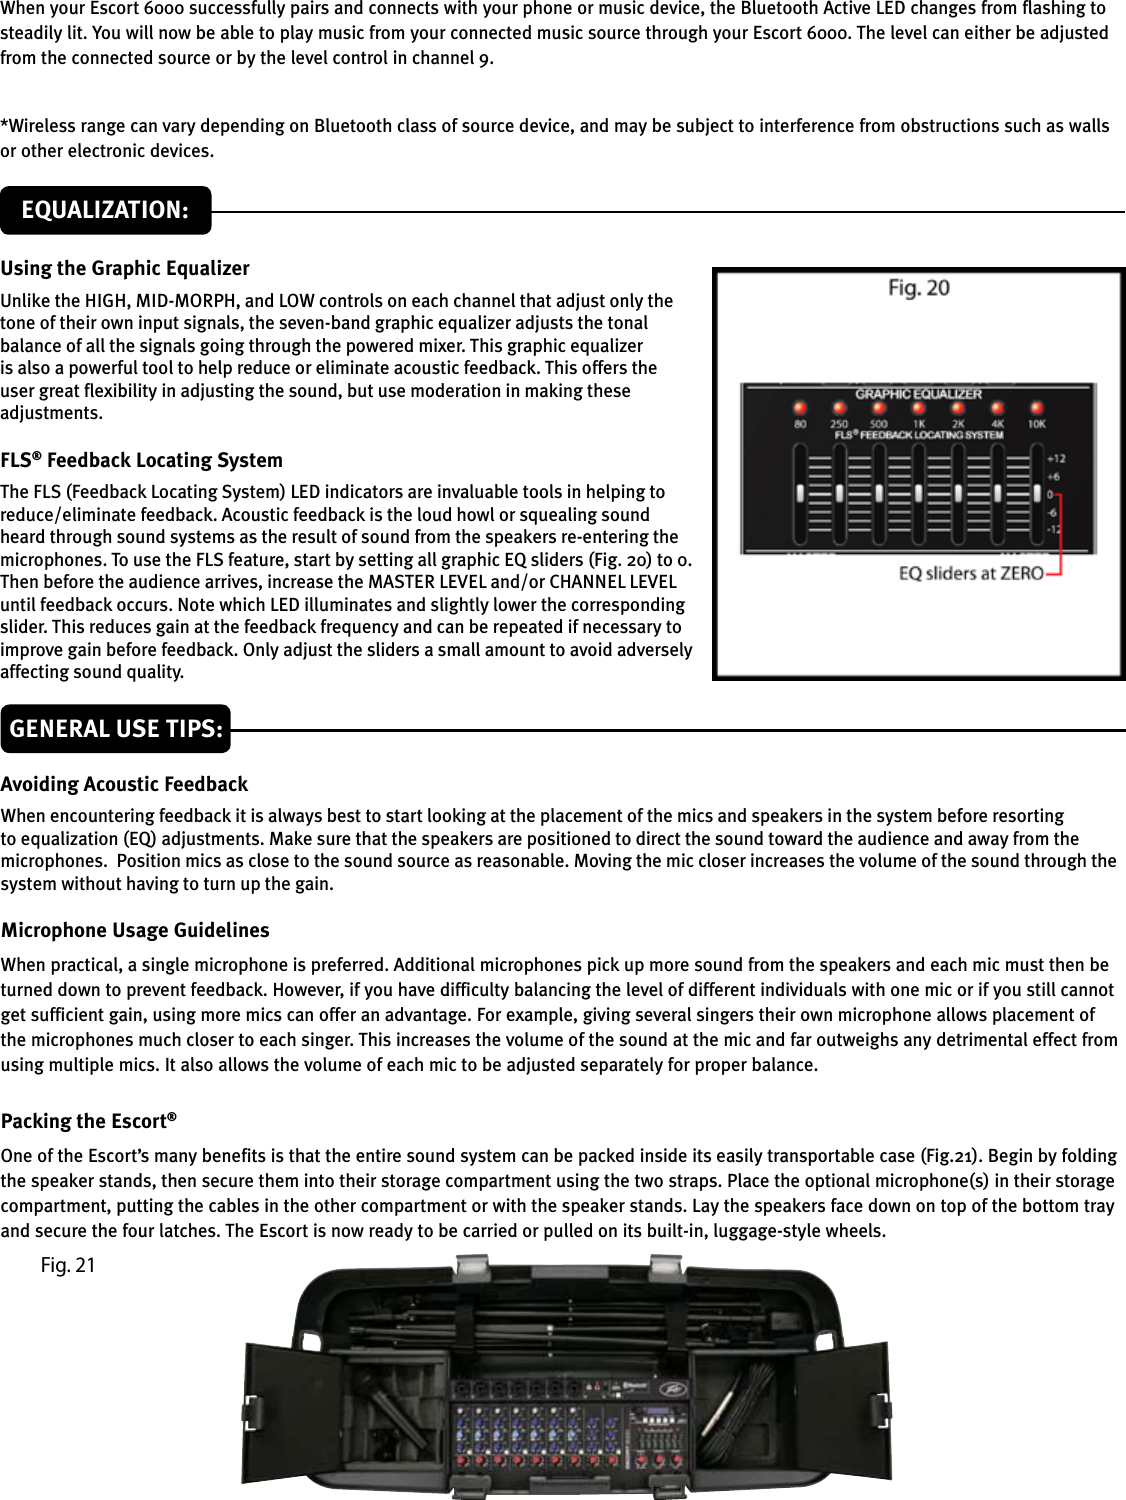 Using the Graphic EqualizerUnlike the HIGH, MID-MORPH, and LOW controls on each channel that adjust only the tone of their own input signals, the seven-band graphic equalizer adjusts the tonal balance of all the signals going through the powered mixer. This graphic equalizer is also a powerful tool to help reduce or eliminate acoustic feedback. This offers the user great exibility in adjusting the sound, but use moderation in making these adjustments.FLS® Feedback Locating SystemThe FLS (Feedback Locating System) LED indicators are invaluable tools in helping to reduce/eliminate feedback. Acoustic feedback is the loud howl or squealing sound heard through sound systems as the result of sound from the speakers re-entering the microphones. To use the FLS feature, start by setting all graphic EQ sliders (Fig. 20) to 0. Then before the audience arrives, increase the MASTER LEVEL and/or CHANNEL LEVEL until feedback occurs. Note which LED illuminates and slightly lower the corresponding slider. This reduces gain at the feedback frequency and can be repeated if necessary to improve gain before feedback. Only adjust the sliders a small amount to avoid adversely affecting sound quality.EQUALIZATION:GENERAL USE TIPS:Avoiding Acoustic FeedbackWhen encountering feedback it is always best to start looking at the placement of the mics and speakers in the system before resorting to equalization (EQ) adjustments. Make sure that the speakers are positioned to direct the sound toward the audience and away from the microphones.  Position mics as close to the sound source as reasonable. Moving the mic closer increases the volume of the sound through the system without having to turn up the gain.Microphone Usage GuidelinesWhen practical, a single microphone is preferred. Additional microphones pick up more sound from the speakers and each mic must then be turned down to prevent feedback. However, if you have difficulty balancing the level of different individuals with one mic or if you still cannot get sufficient gain, using more mics can offer an advantage. For example, giving several singers their own microphone allows placement of the microphones much closer to each singer. This increases the volume of the sound at the mic and far outweighs any detrimental effect from using multiple mics. It also allows the volume of each mic to be adjusted separately for proper balance.Packing the Escort®One of the Escort’s many benefits is that the entire sound system can be packed inside its easily transportable case (Fig.21). Begin by folding the speaker stands, then secure them into their storage compartment using the two straps. Place the optional microphone(s) in their storage compartment, putting the cables in the other compartment or with the speaker stands. Lay the speakers face down on top of the bottom tray and secure the four latches. The Escort is now ready to be carried or pulled on its built-in, luggage-style wheels.Fig. 21When your Escort 6000 successfully pairs and connects with your phone or music device, the Bluetooth Active LED changes from flashing to steadily lit. You will now be able to play music from your connected music source through your Escort 6000. The level can either be adjusted from the connected source or by the level control in channel 9.*Wireless range can vary depending on Bluetooth class of source device, and may be subject to interference from obstructions such as walls or other electronic devices.